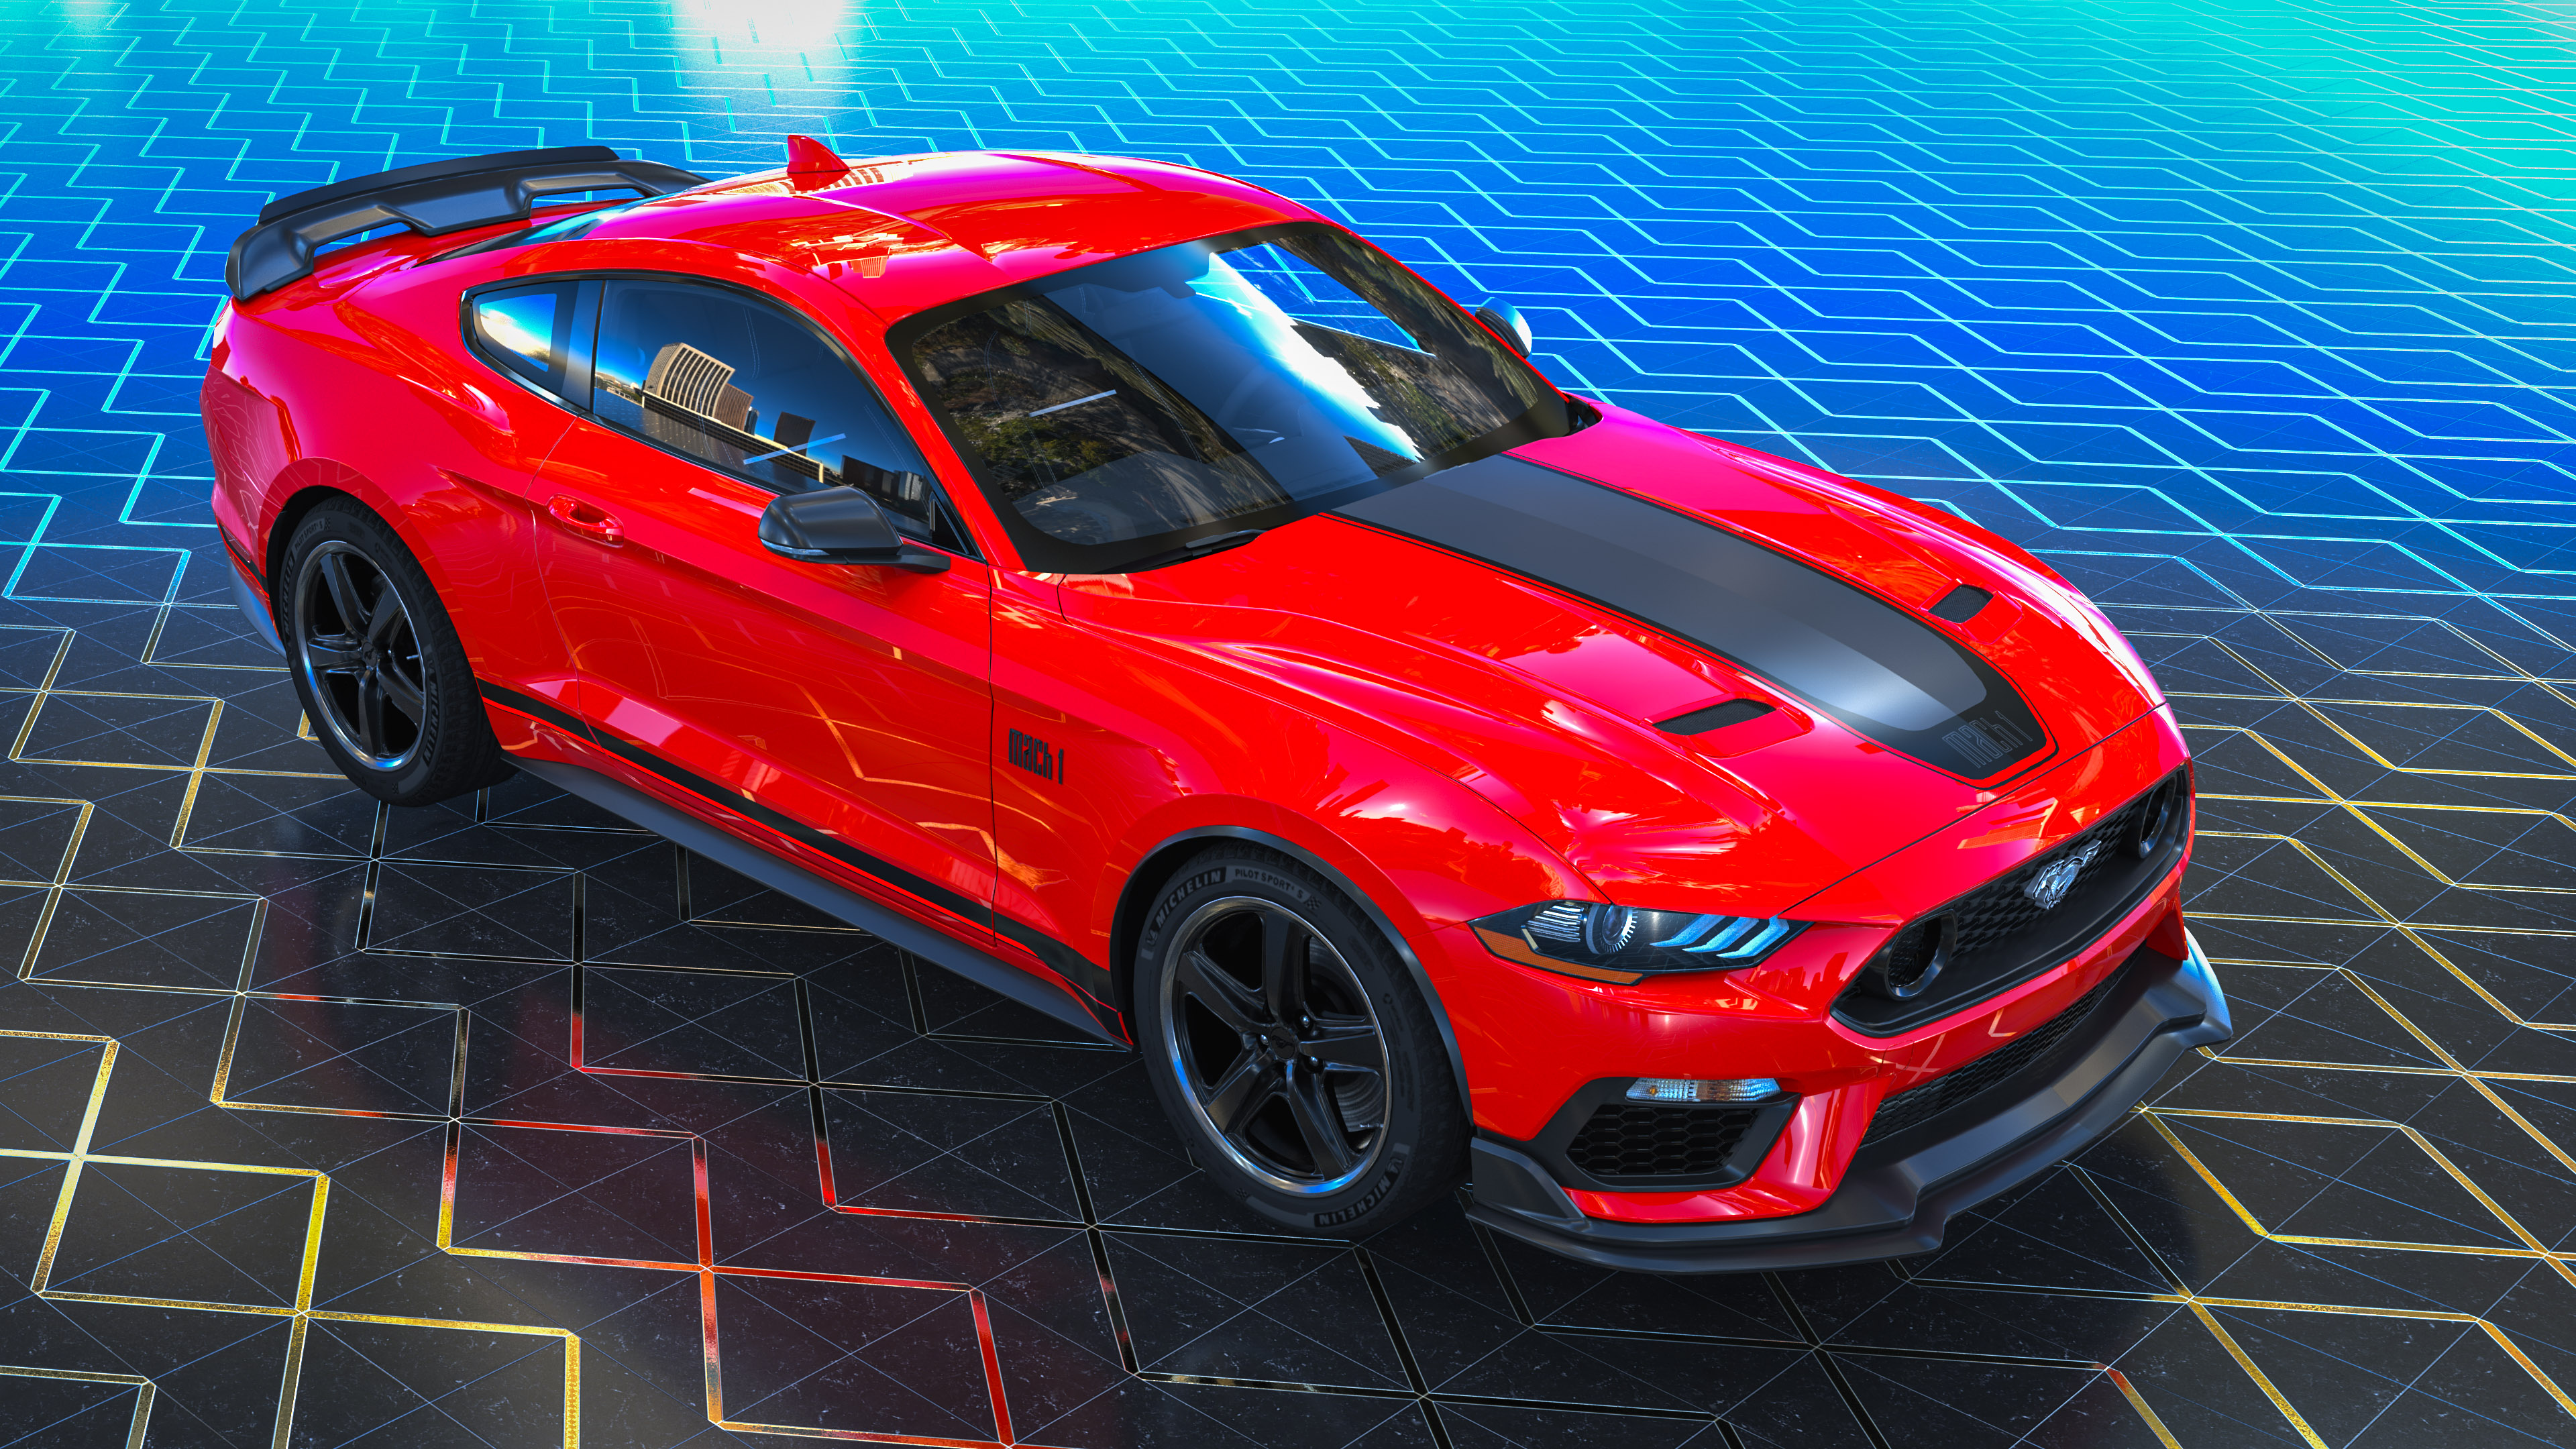 Celebrate the legacy of American muscle with our best car wallpaper featuring the red Ford Mustang, a symbol of power and performance.